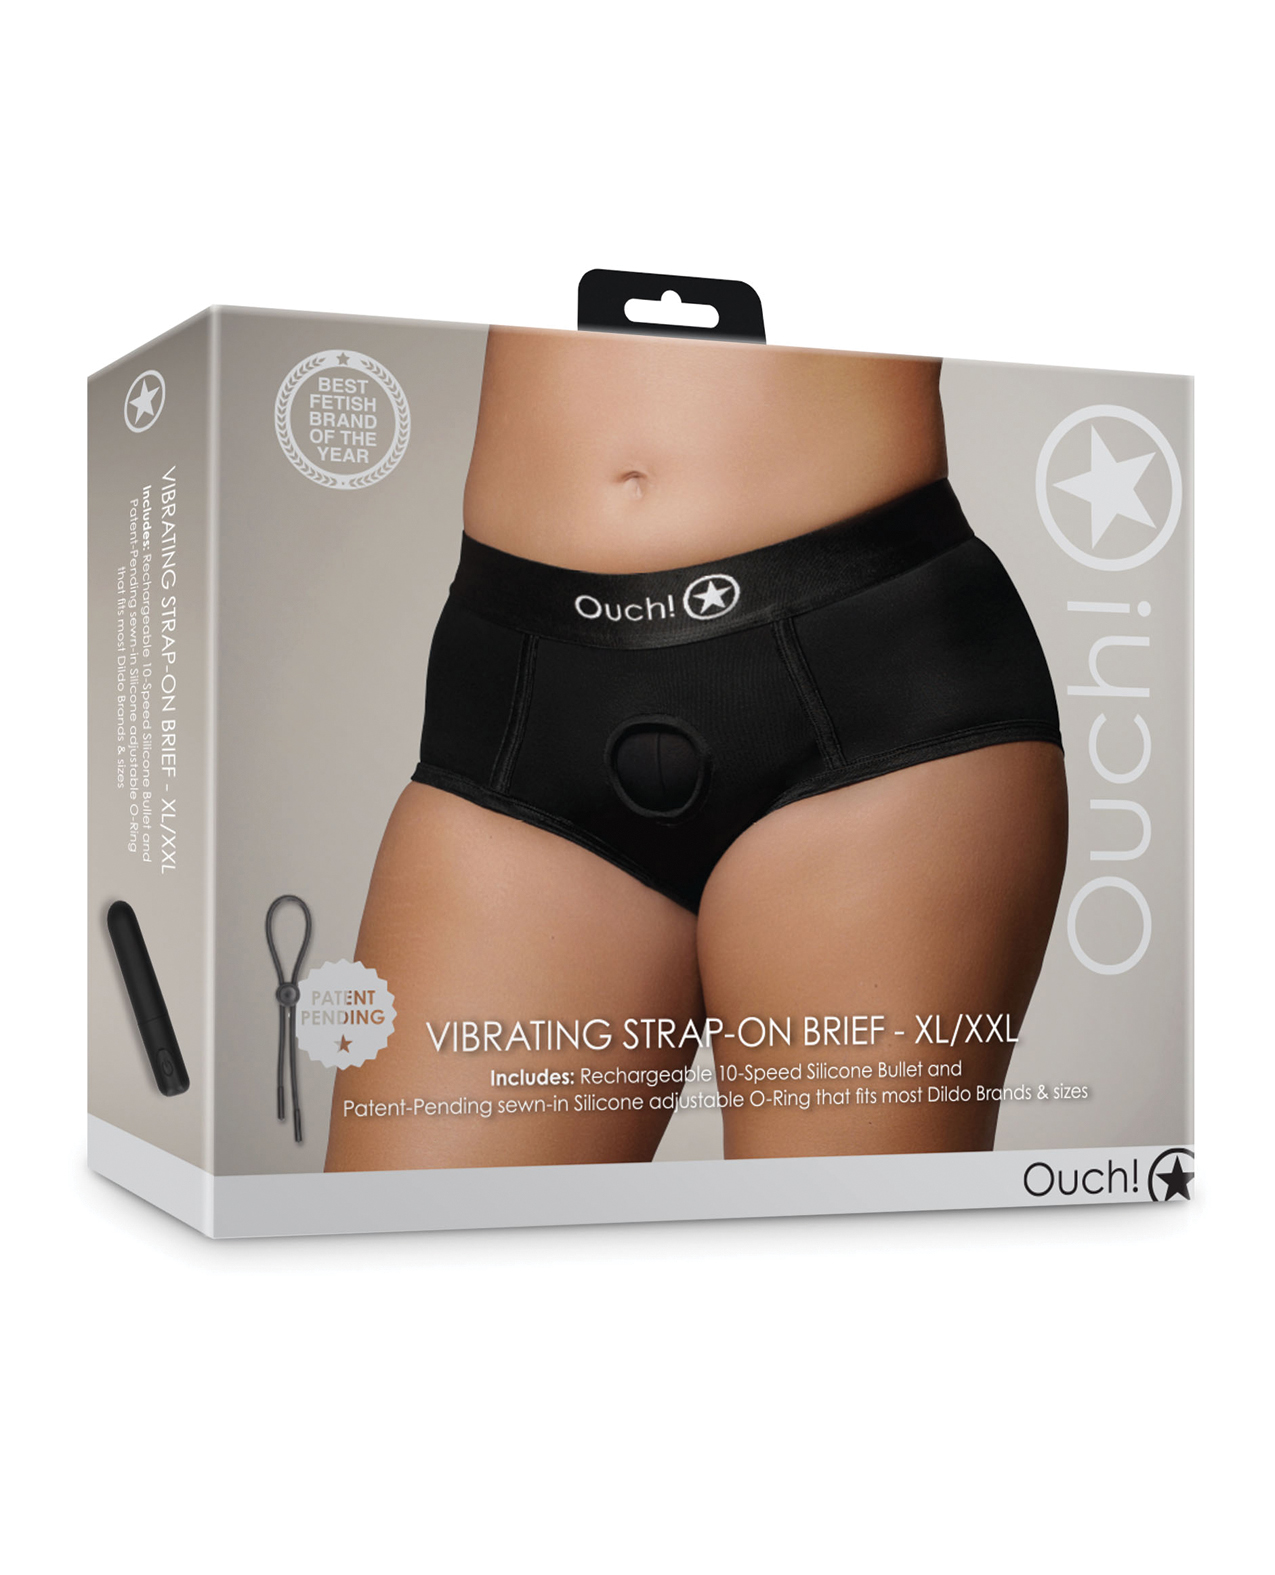 The picture on the packaging is a woman's torso wearing the vibrating briefs